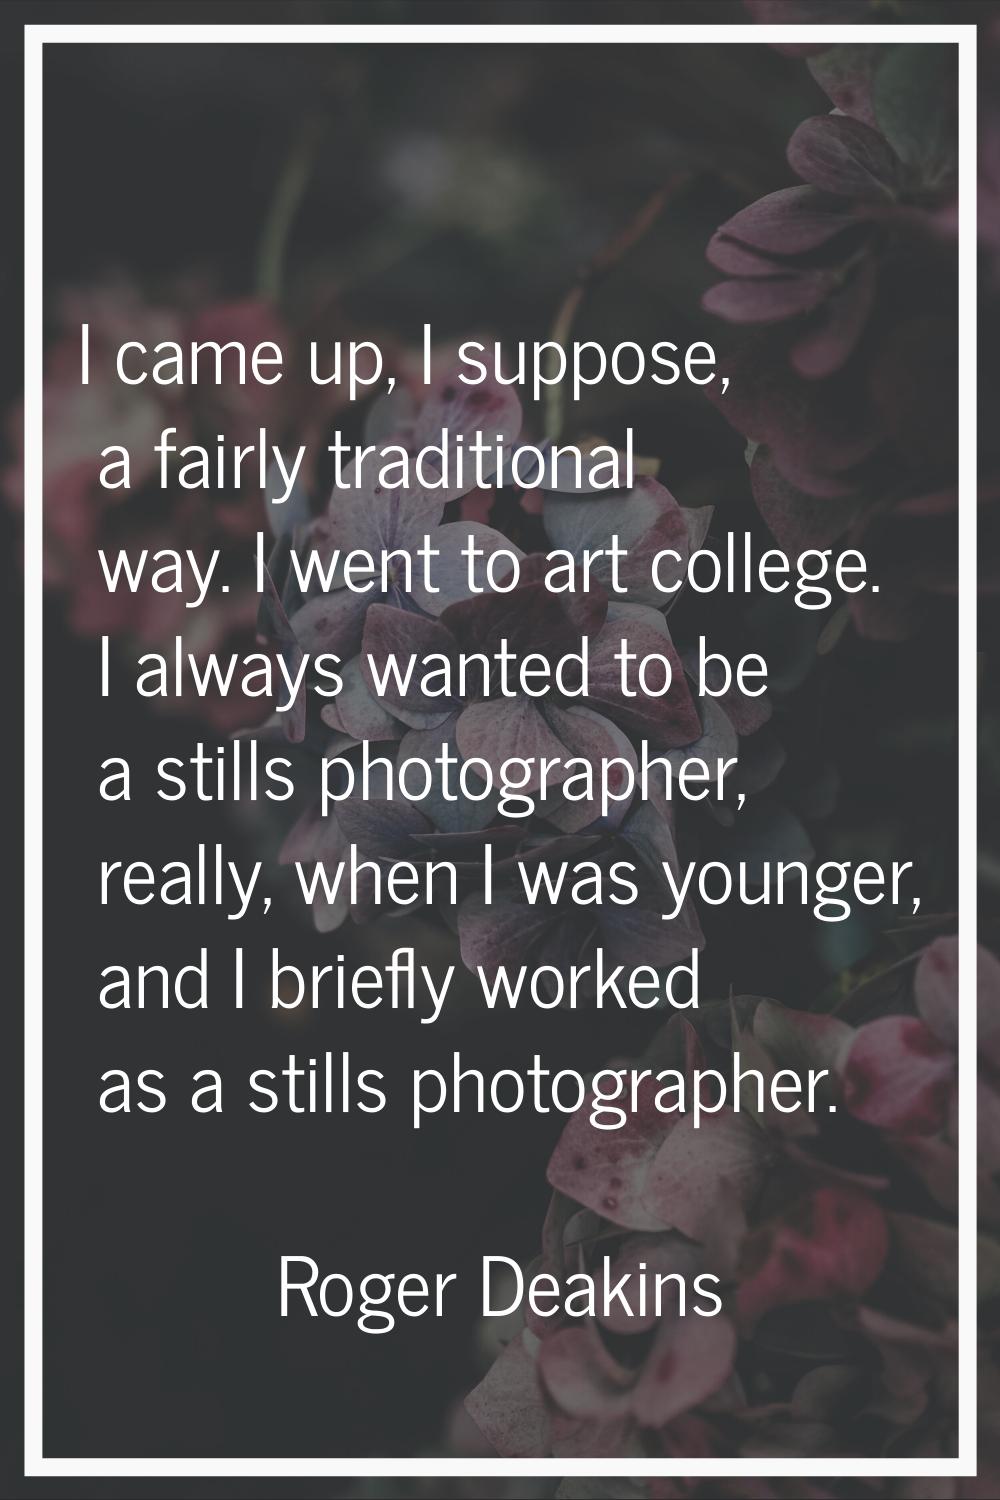 I came up, I suppose, a fairly traditional way. I went to art college. I always wanted to be a stil